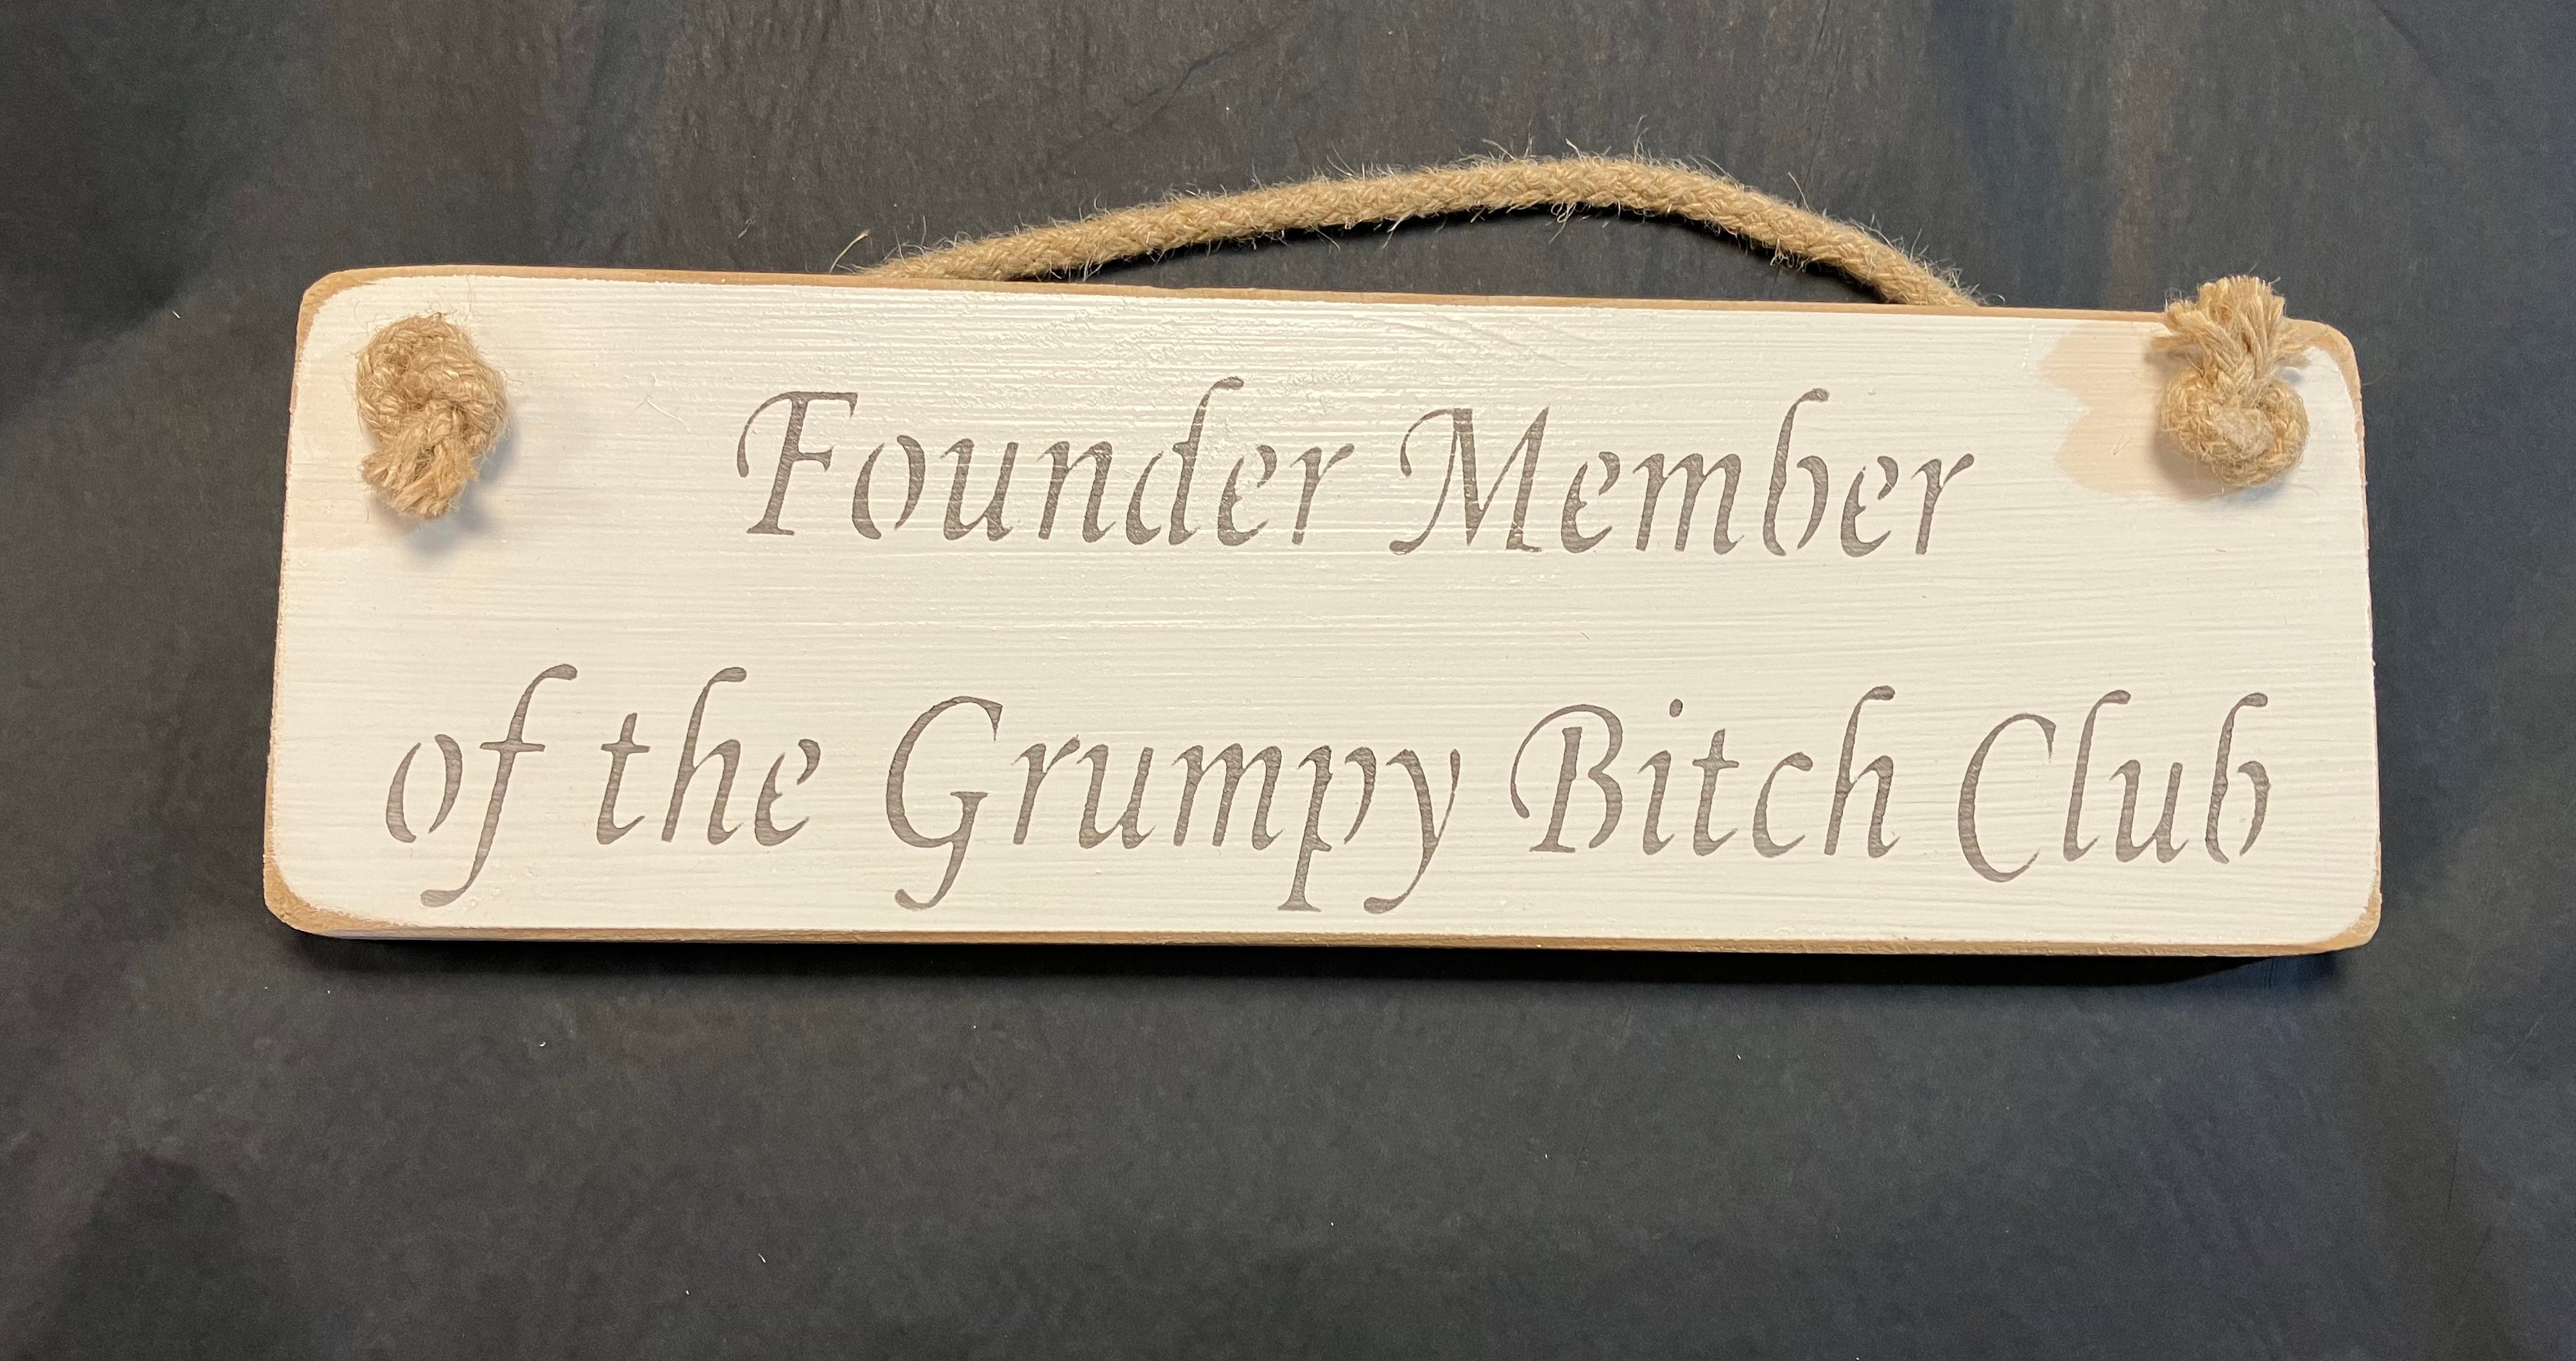 Founder member of the grumpy bitch club wooden roped sign